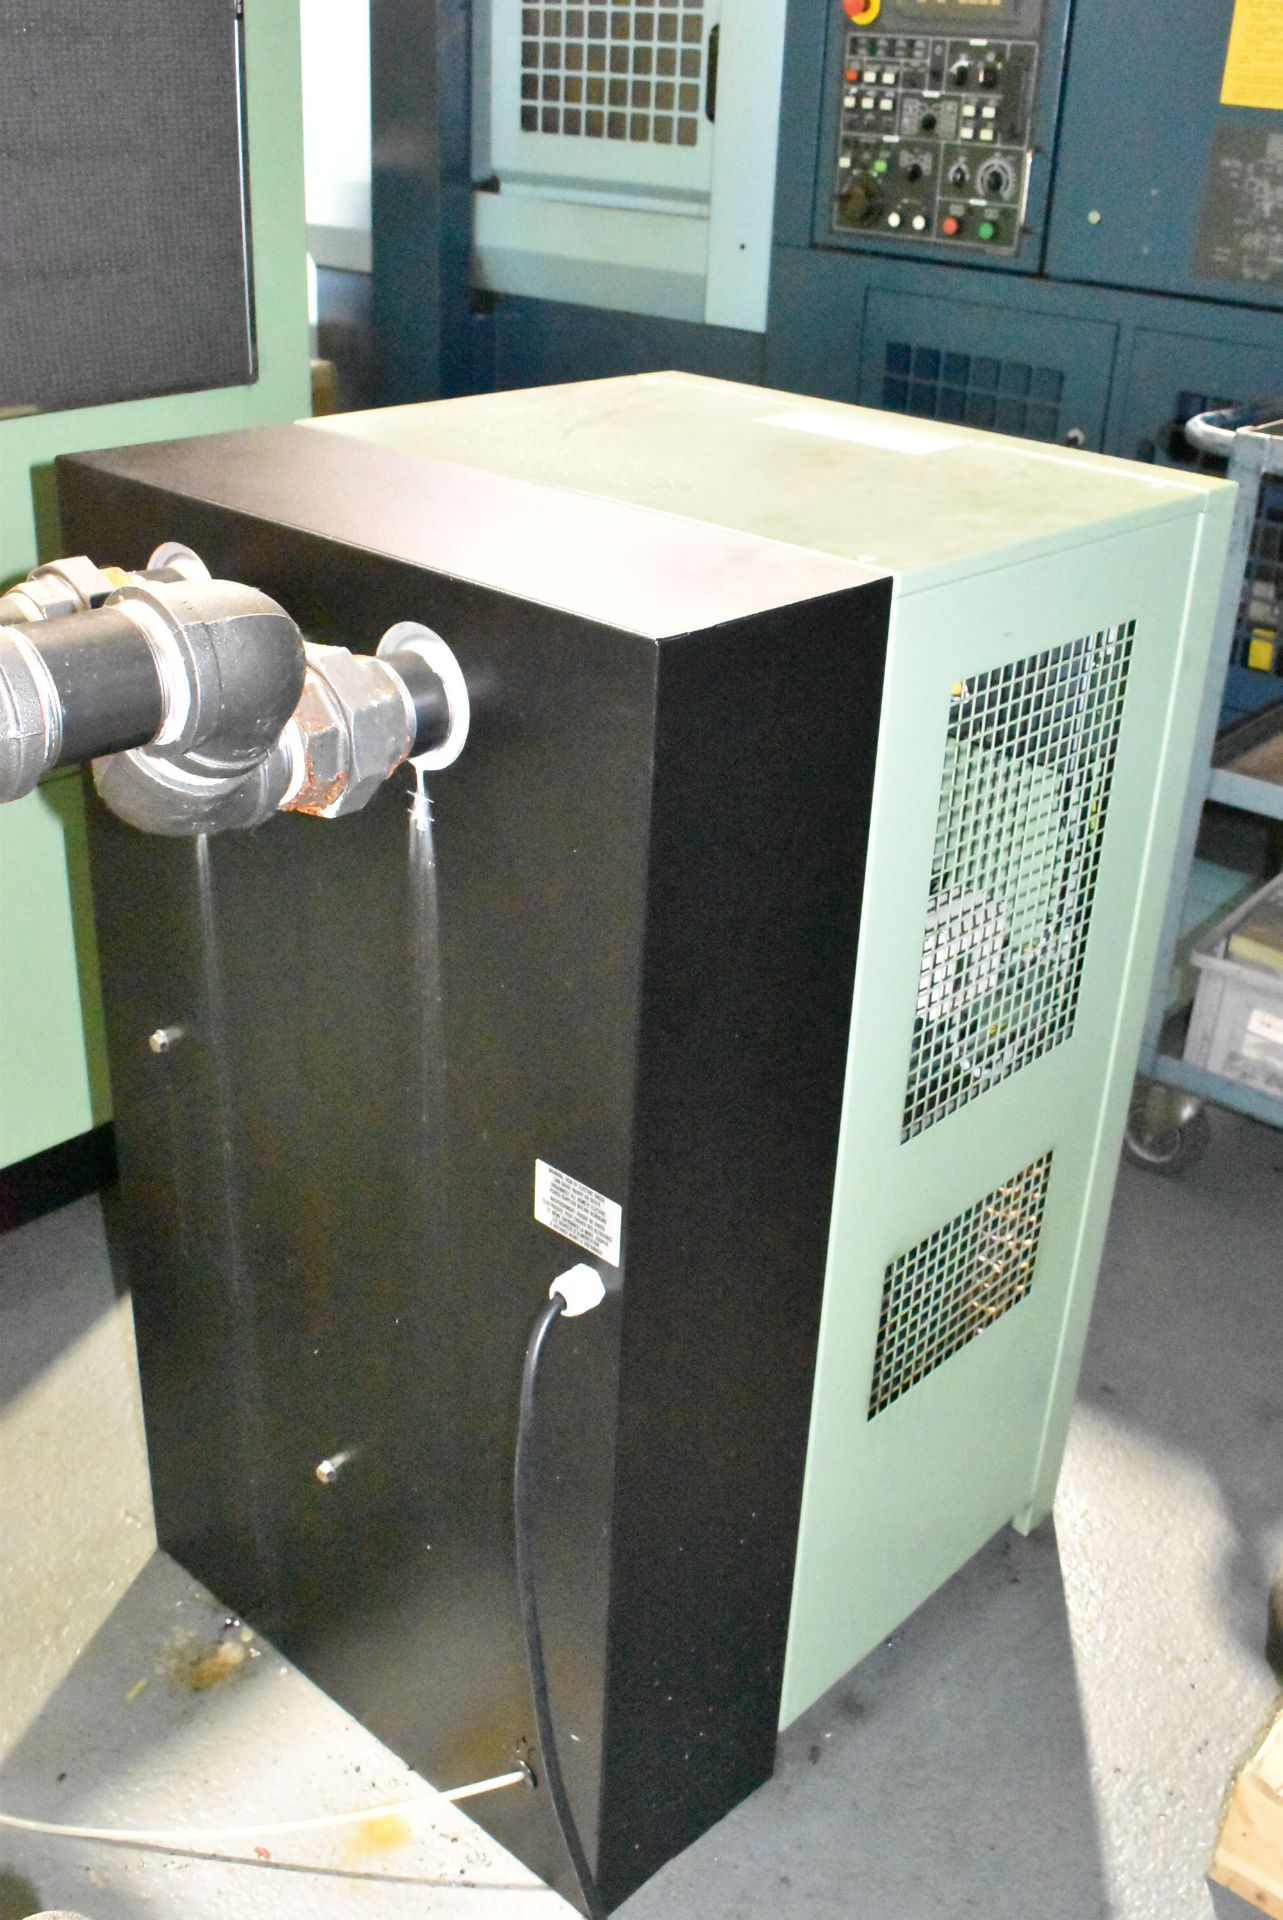 SULLAIR SRB375 REFRIGERATED AIR DRYER WITH 375 SCFM NOMINAL FLOW RATE, 203 PSI MAXIMUM AIR PRESSURE, - Image 2 of 4